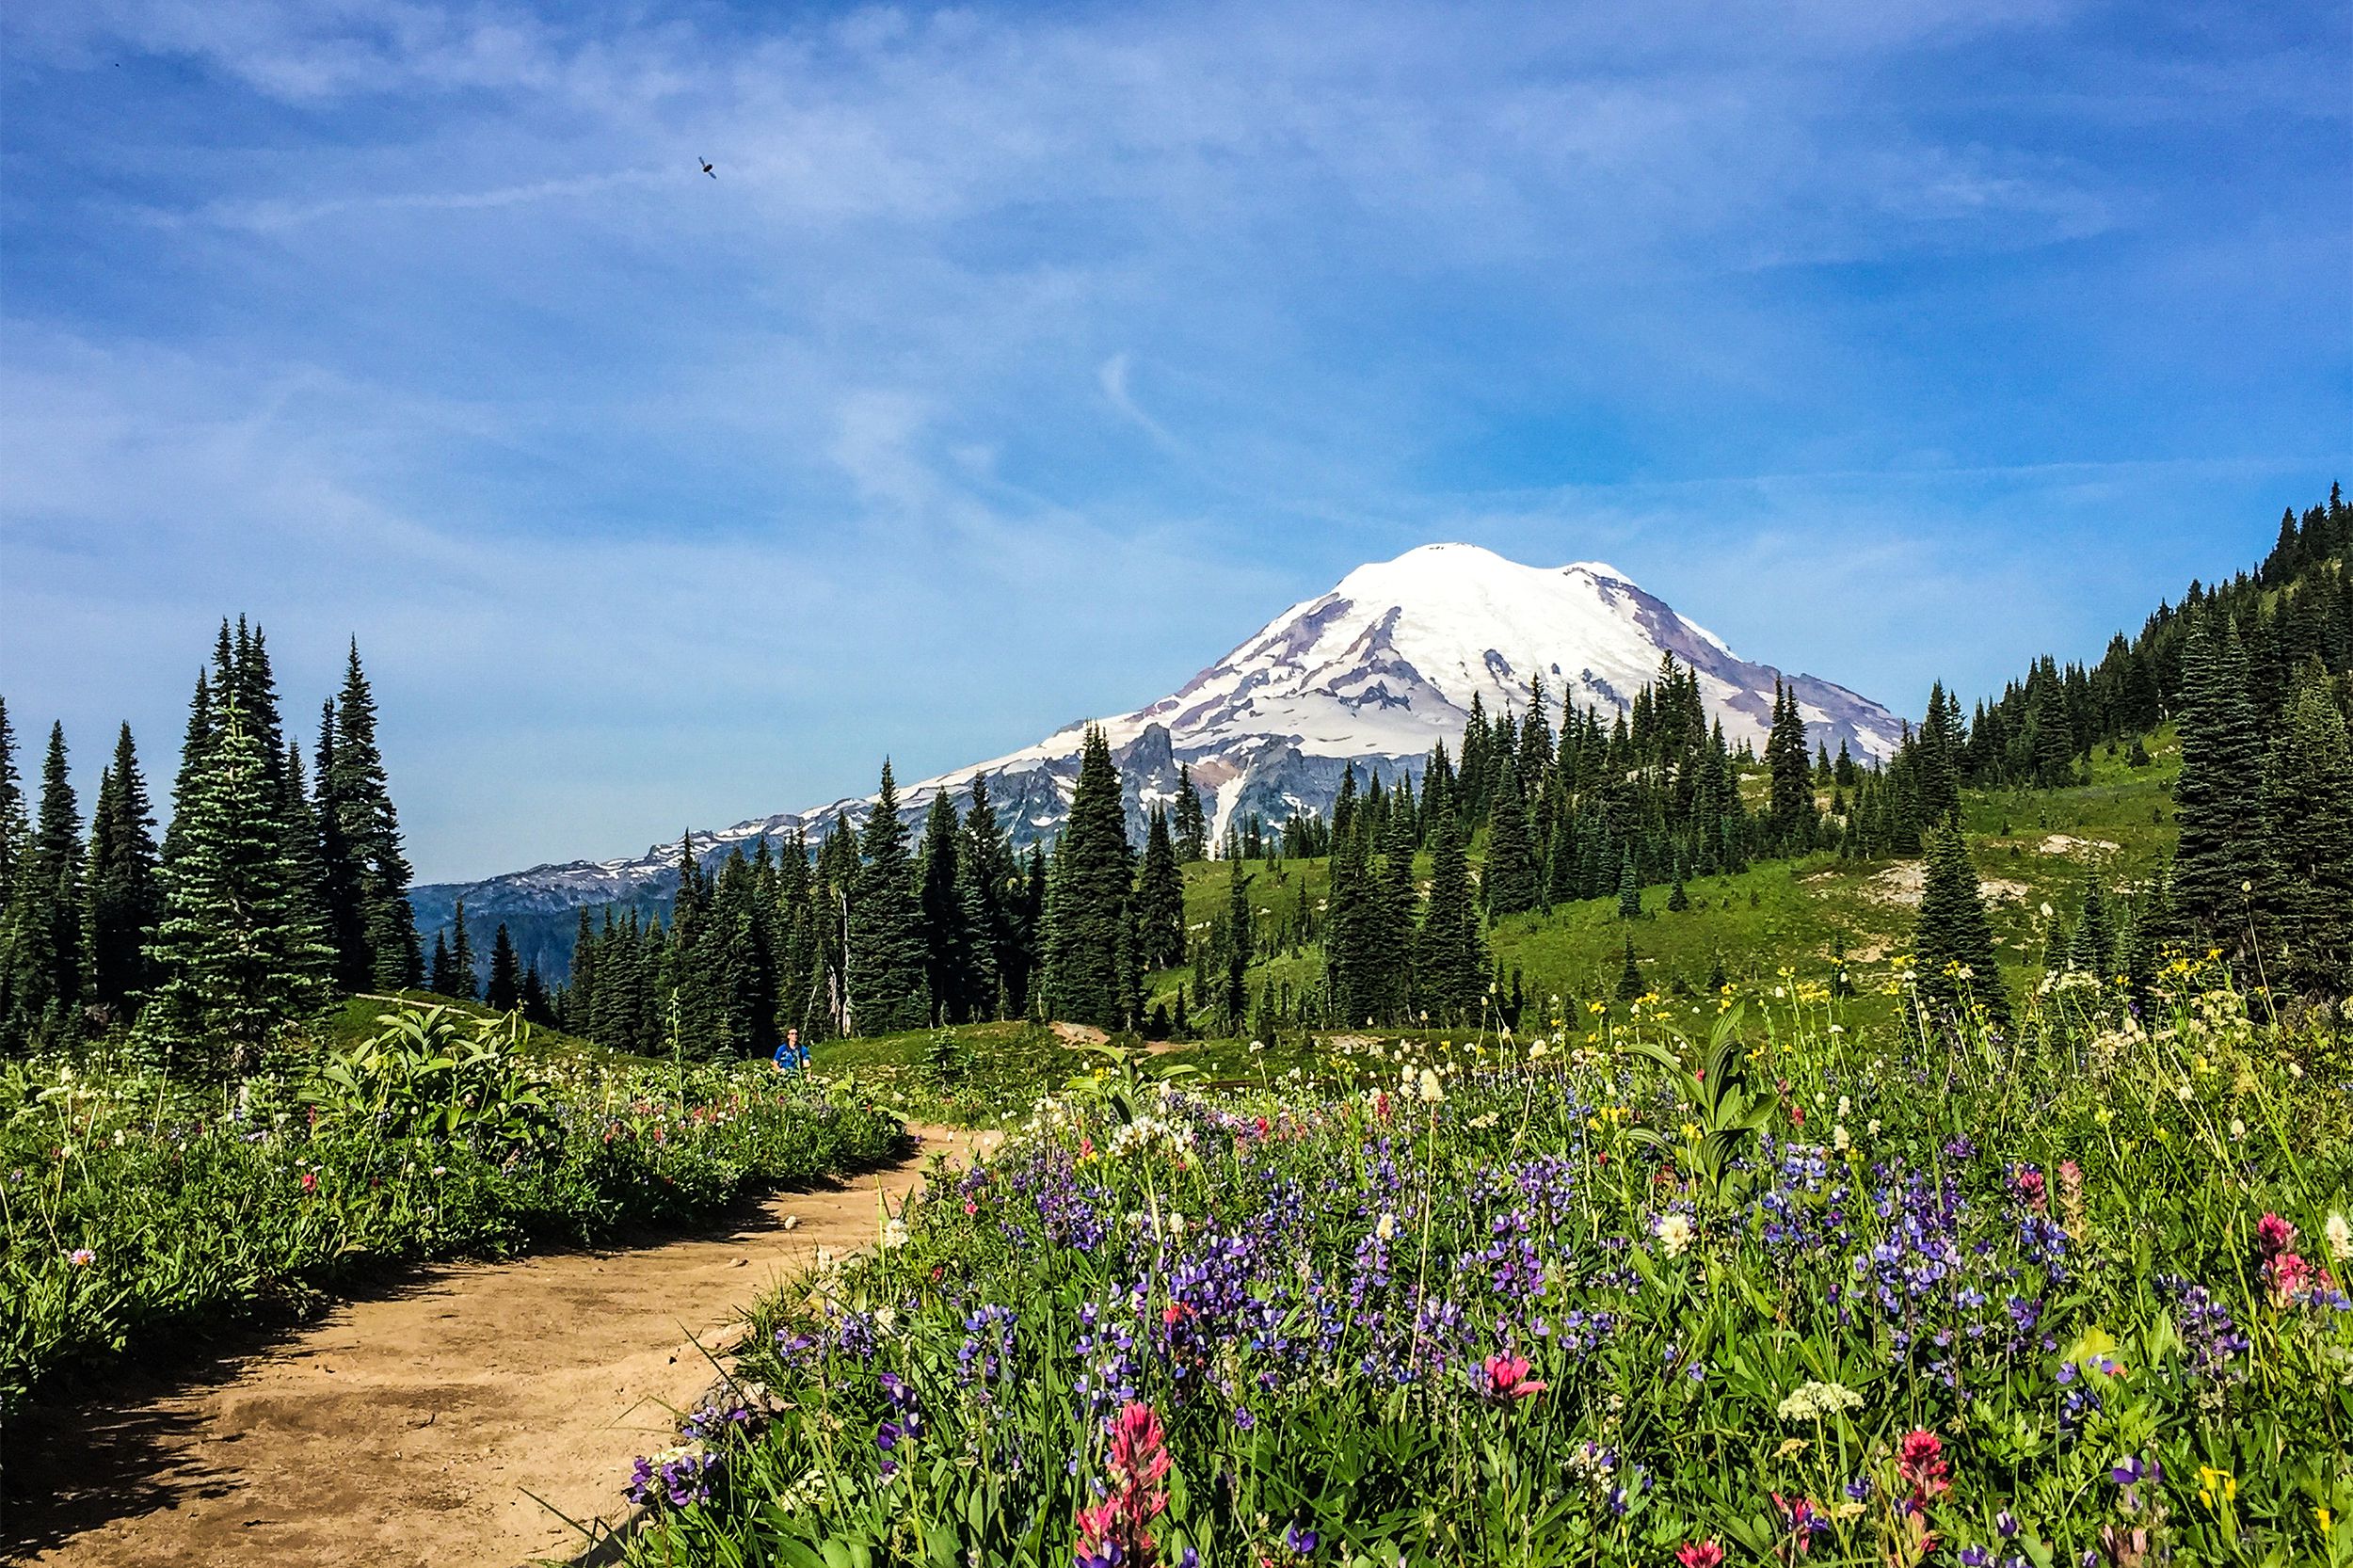 Mount Rainier rises more than 14,410 feet above sea level and has spawned five major rivers. <a href="https://www.nps.gov/mora/index.htm">Mount Rainier National Park</a> is also famous for its picturesque subalpine meadows of wildflowers. There's also an abundance of wildlife here and ancient forests.